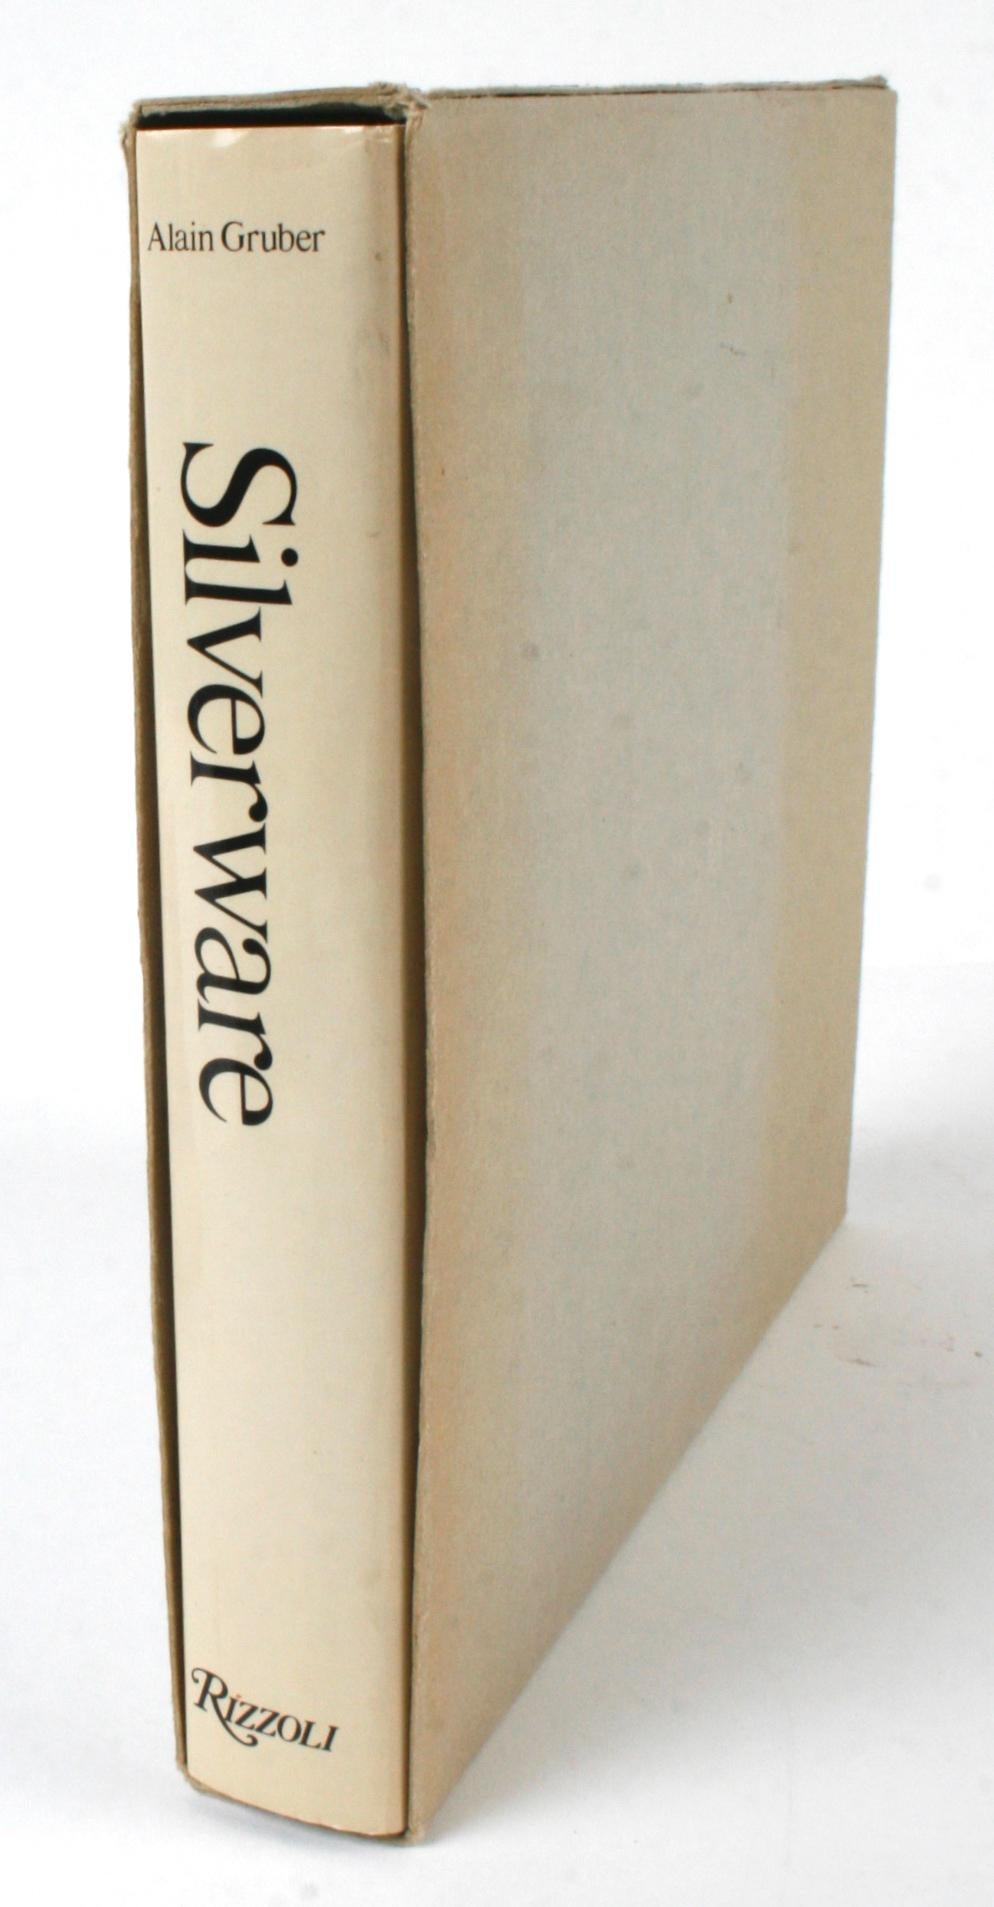 Silverware by Alain Gruber, First Edition Book 14